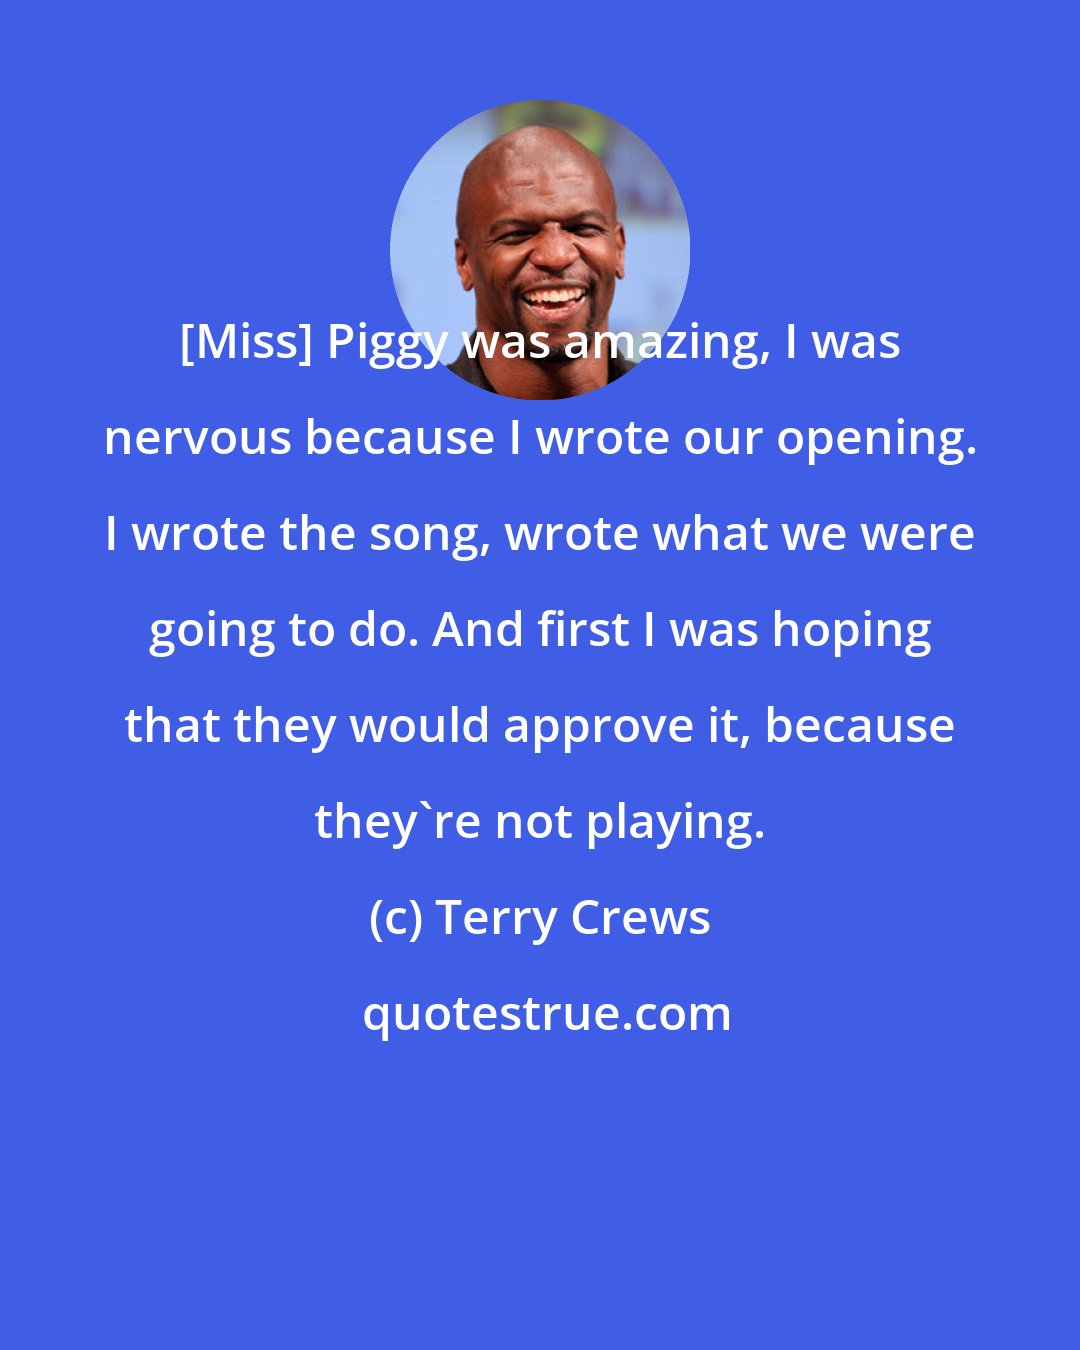 Terry Crews: [Miss] Piggy was amazing, I was nervous because I wrote our opening. I wrote the song, wrote what we were going to do. And first I was hoping that they would approve it, because they're not playing.